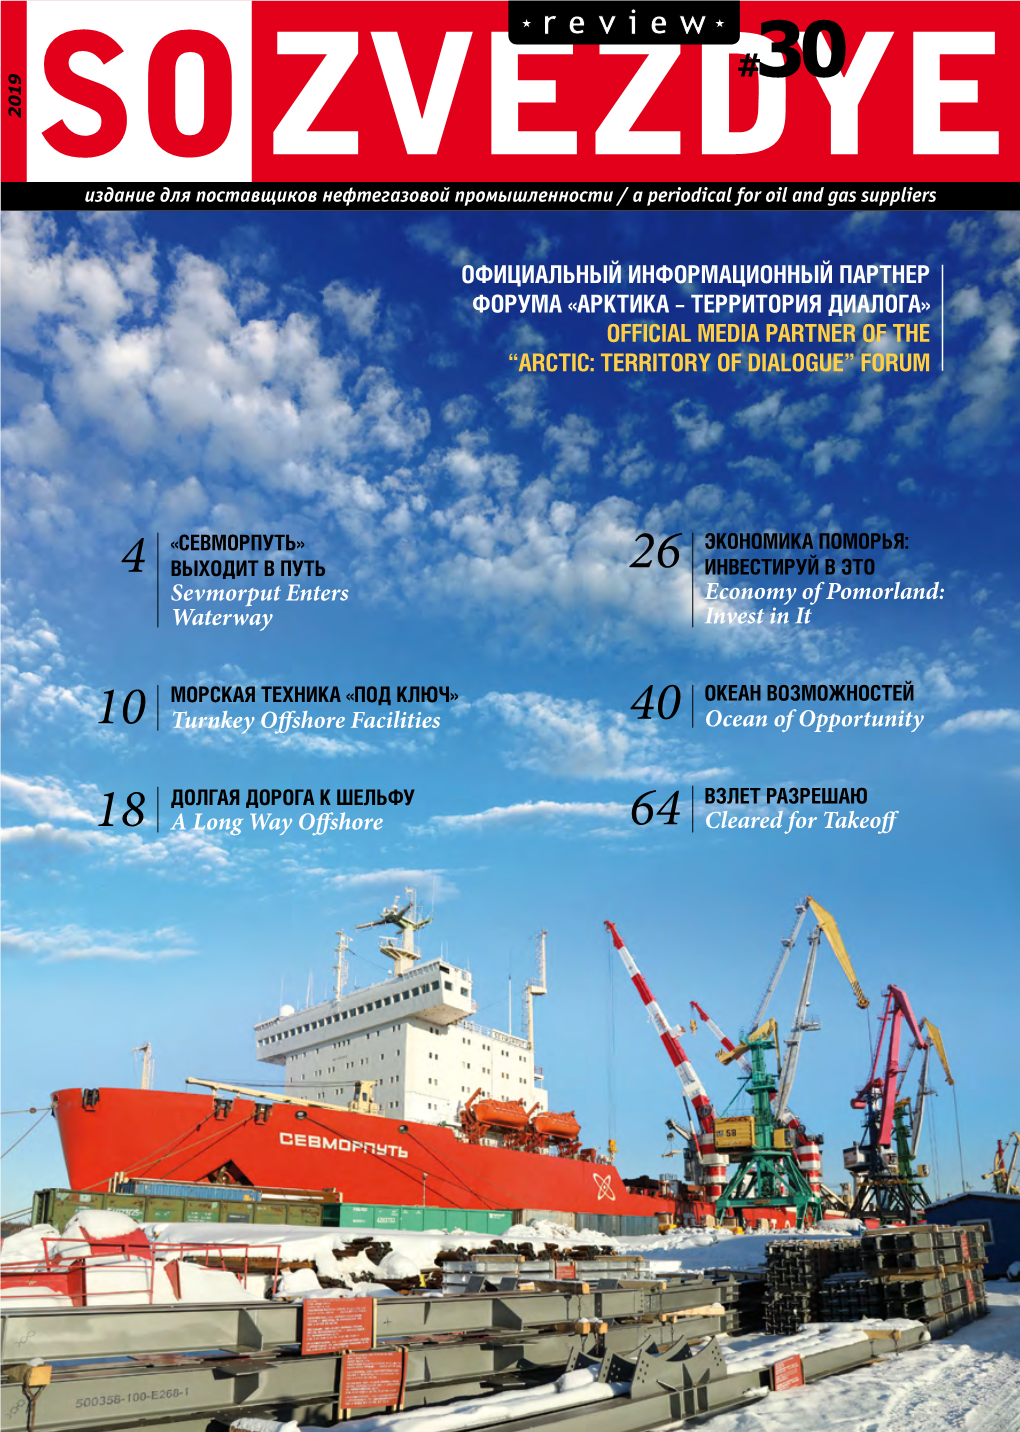 Sevmorput Enters Waterway Turnkey Offshore Facilities a Long Way